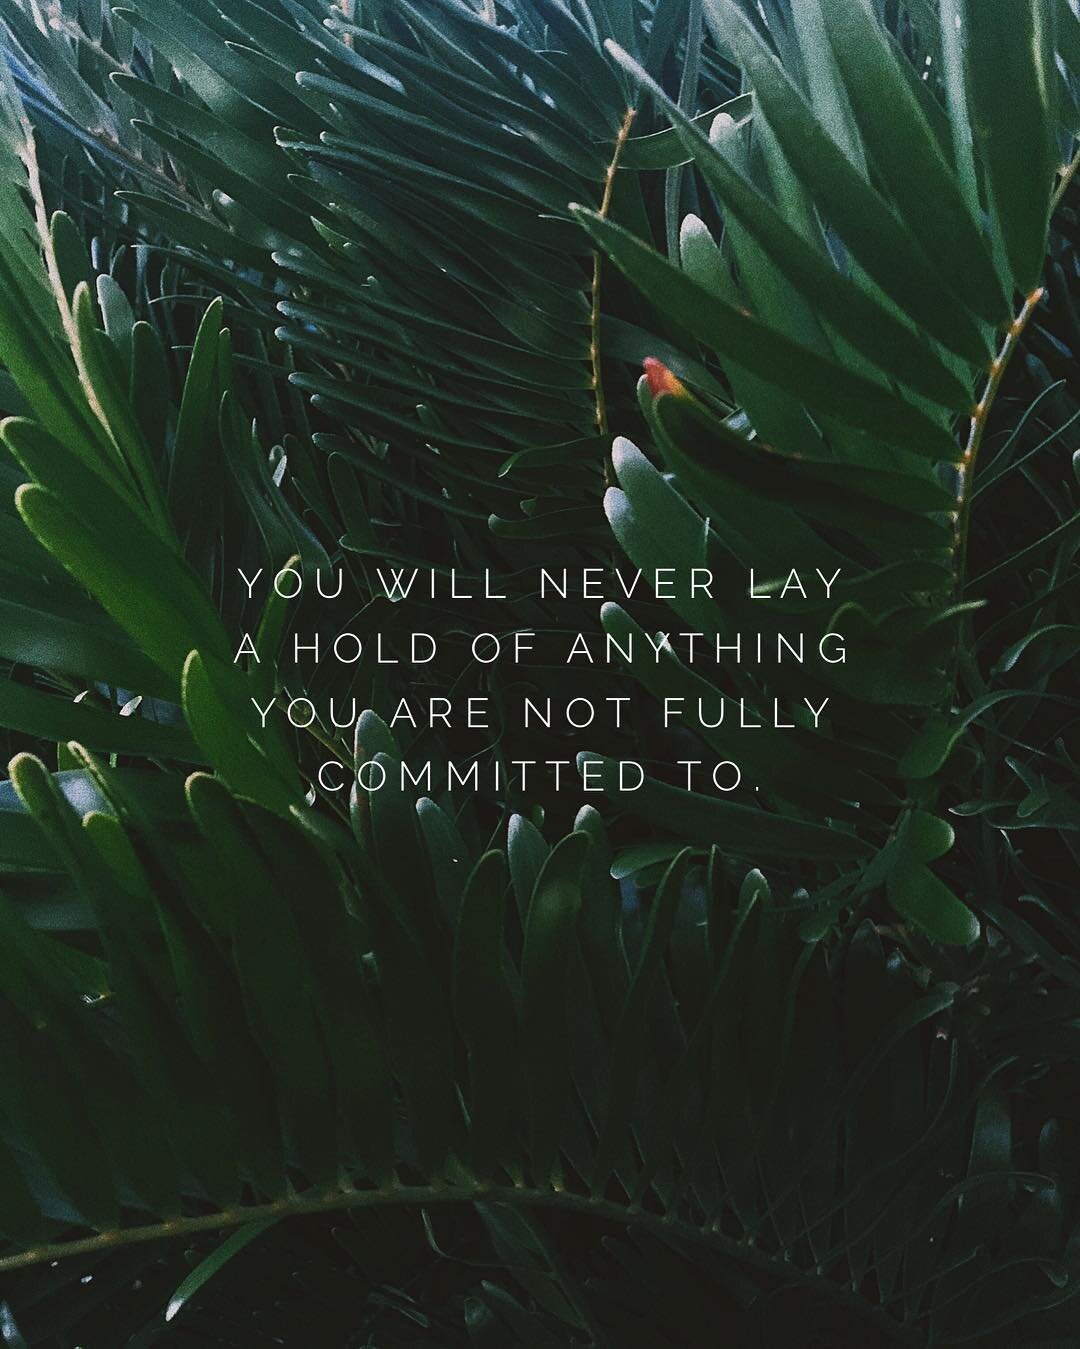 &ldquo;You will never lay a hold of anything you are not fully committed to.&rdquo; @pastorwilliammcdowell